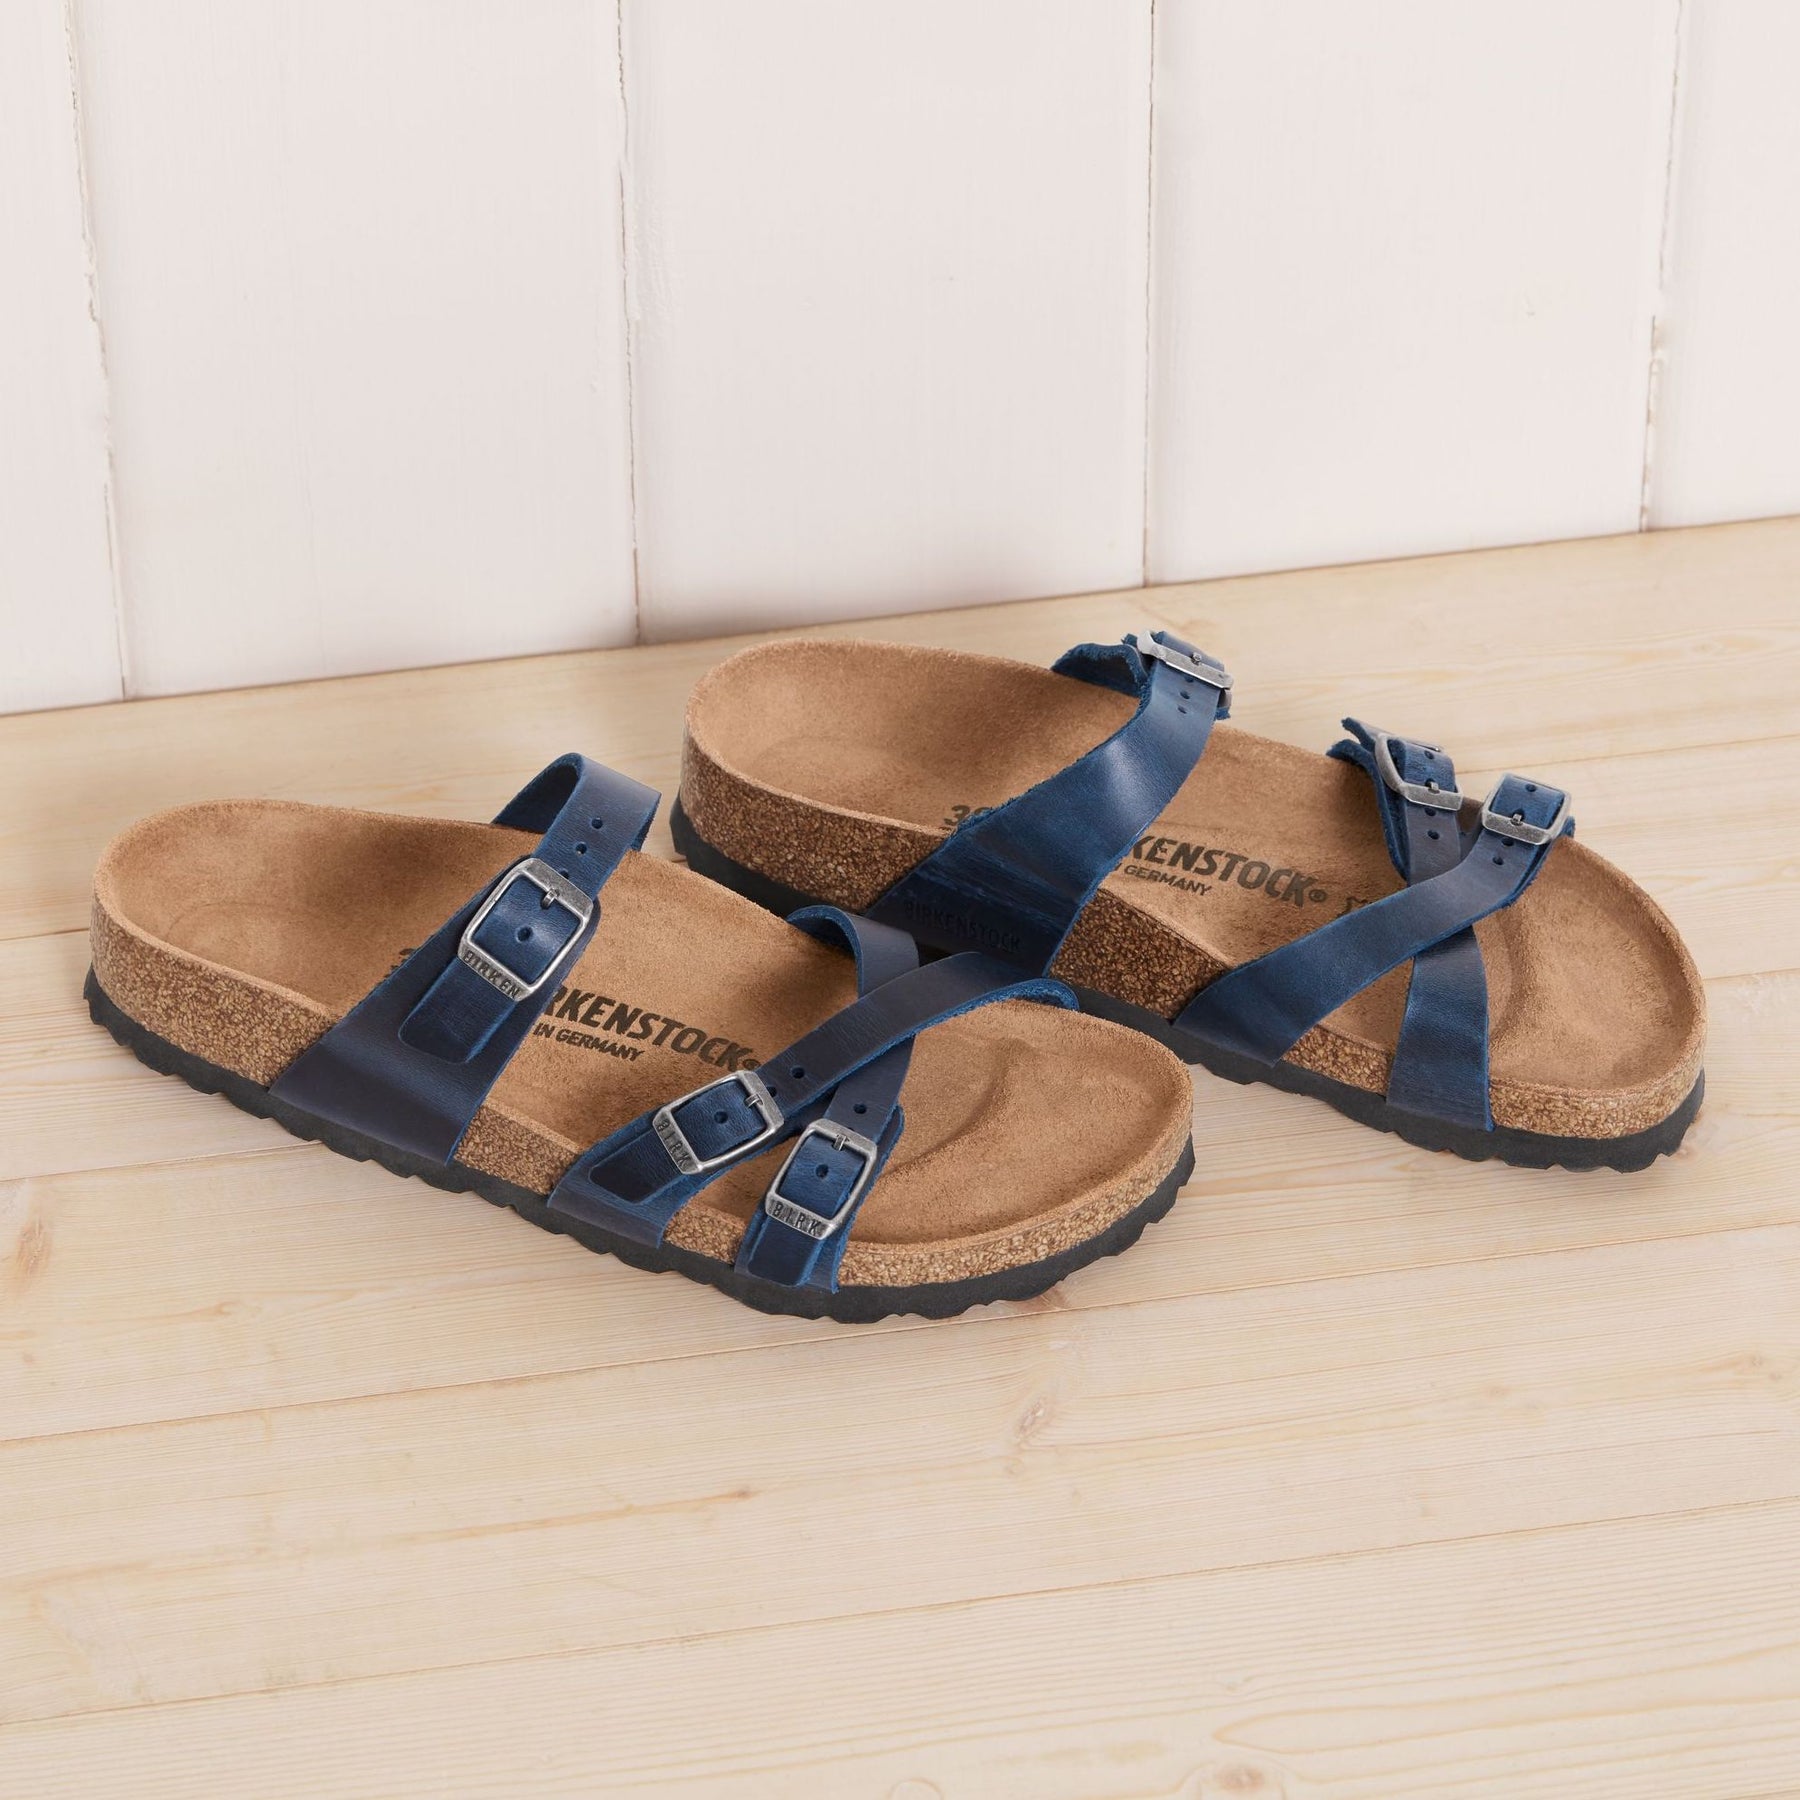 Birkenstock Limited Edition Franca blue oiled leather